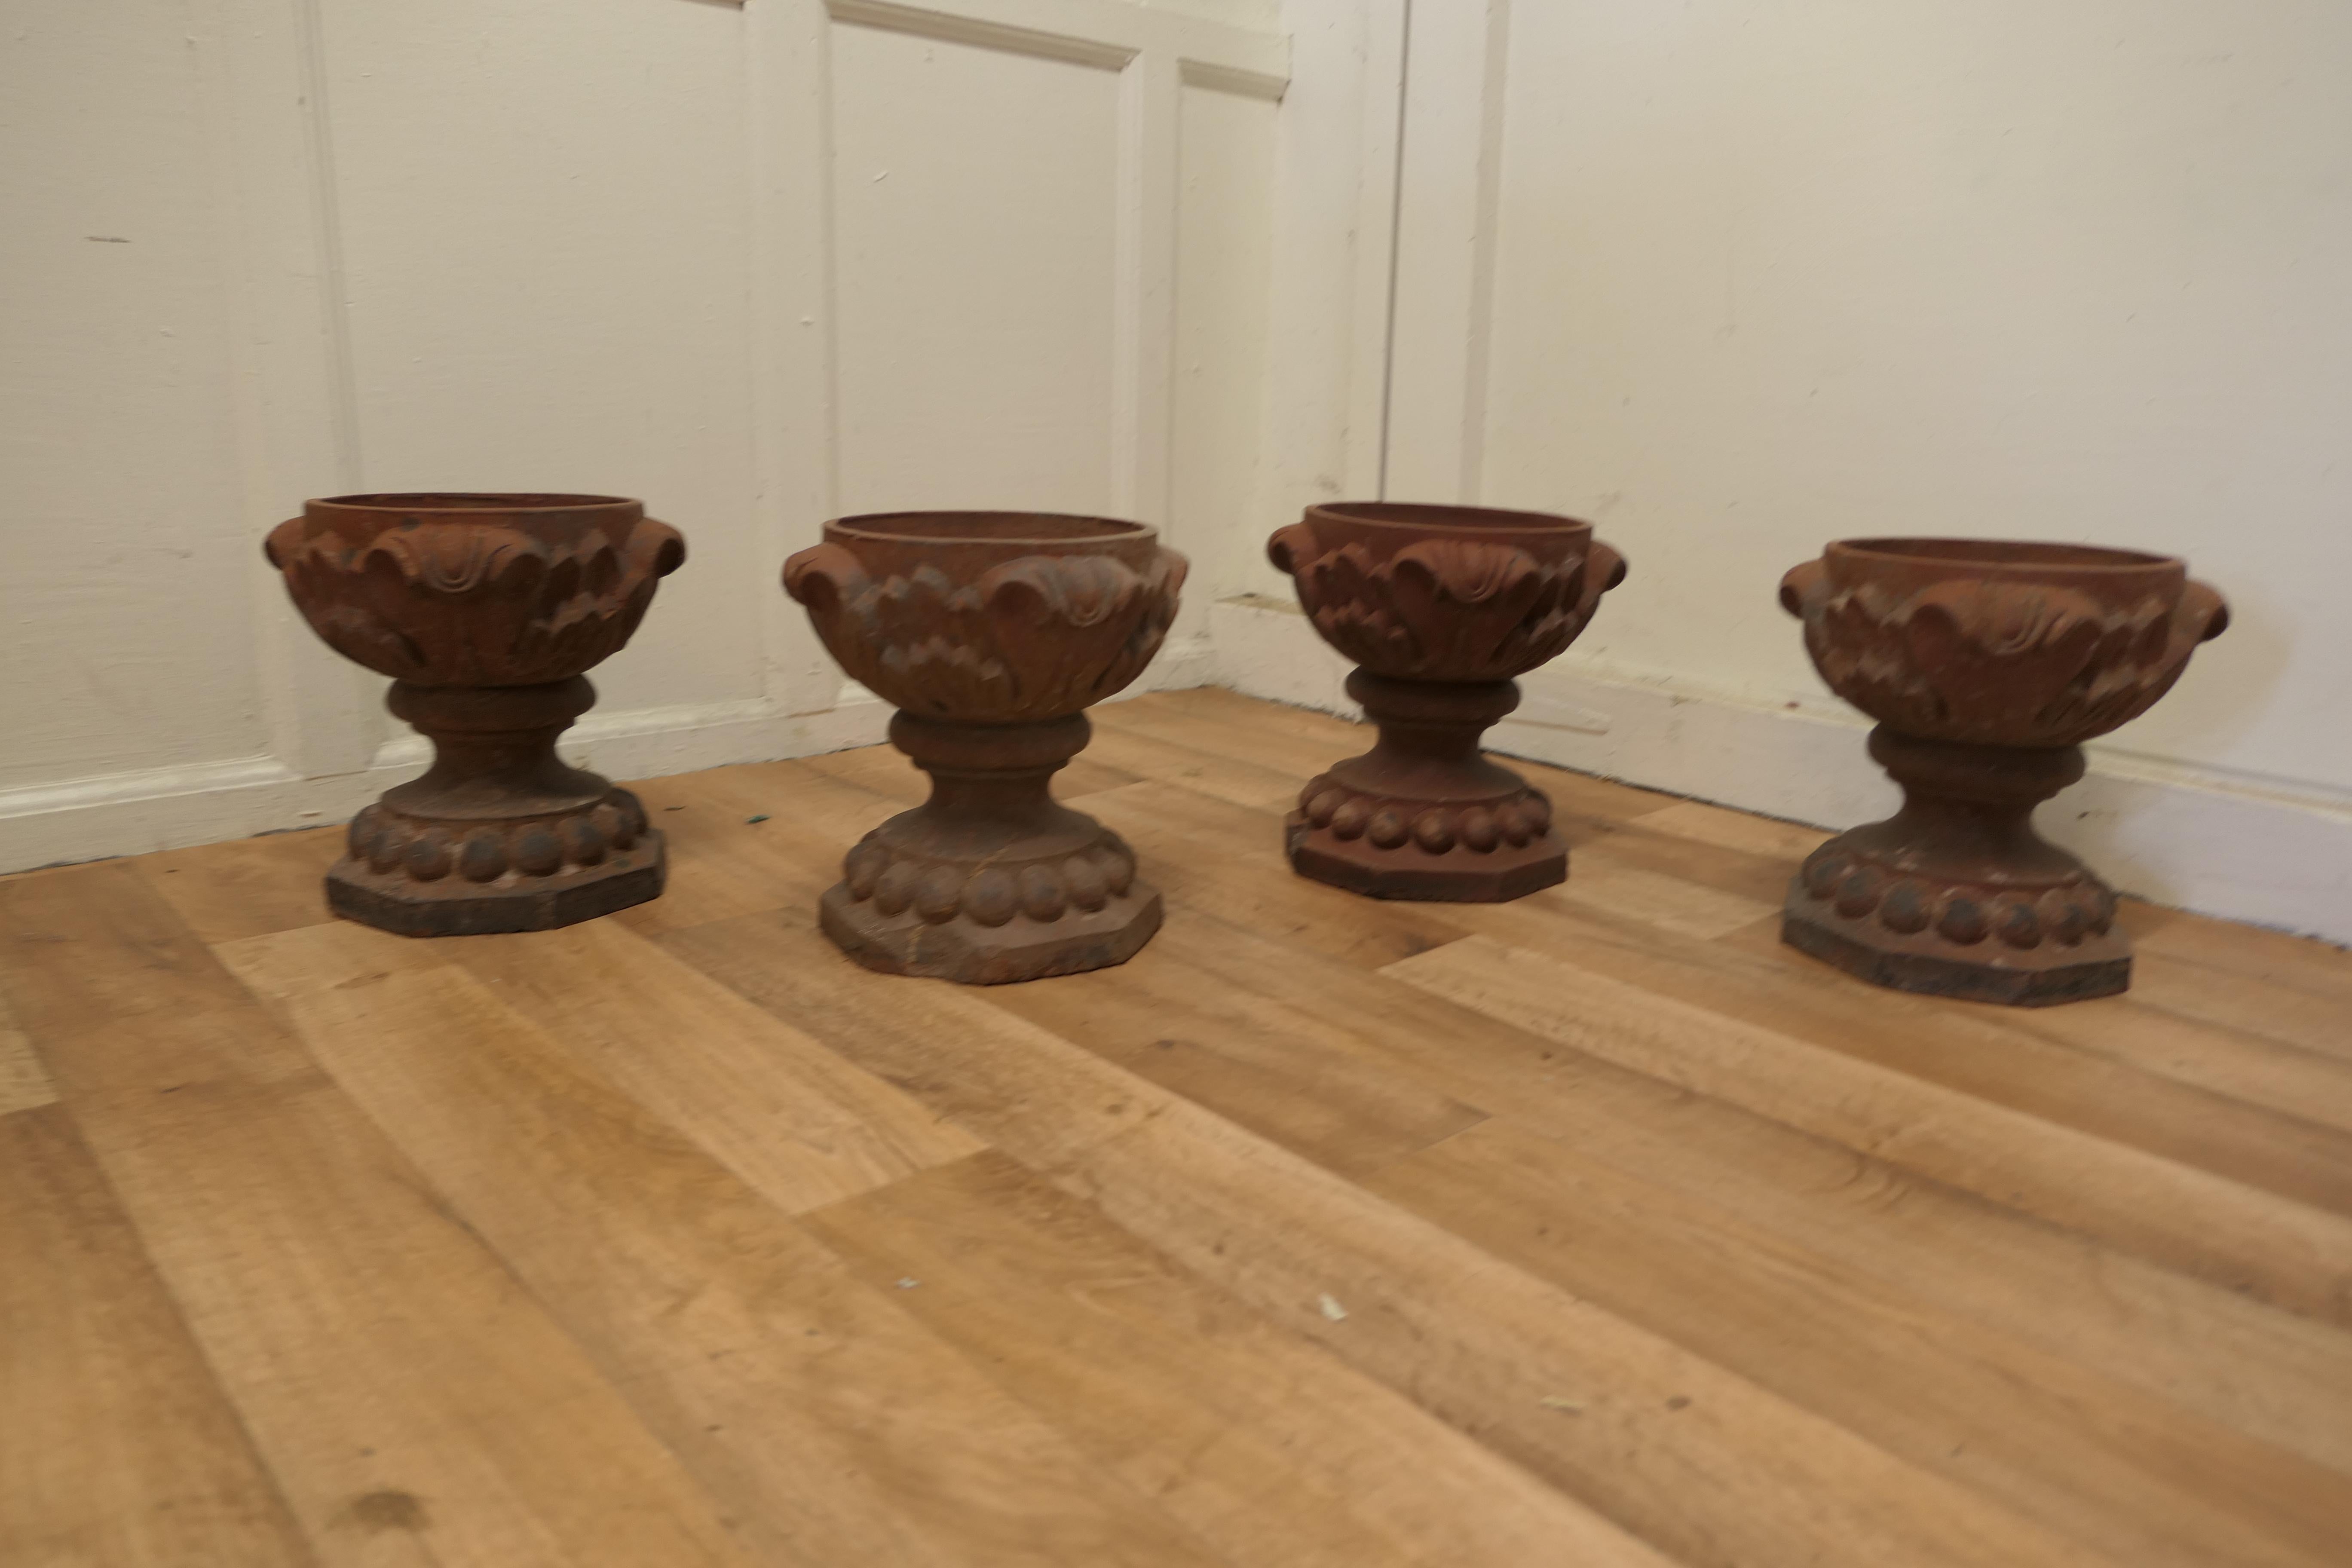 4 Terracotta Garden Urns 

These are a attractive weathered pots, they are made in terracotta and are in well weathered condition with some minor chipping due to their age

Each Urn is 11” high, and 11” in diameter
TCC50
